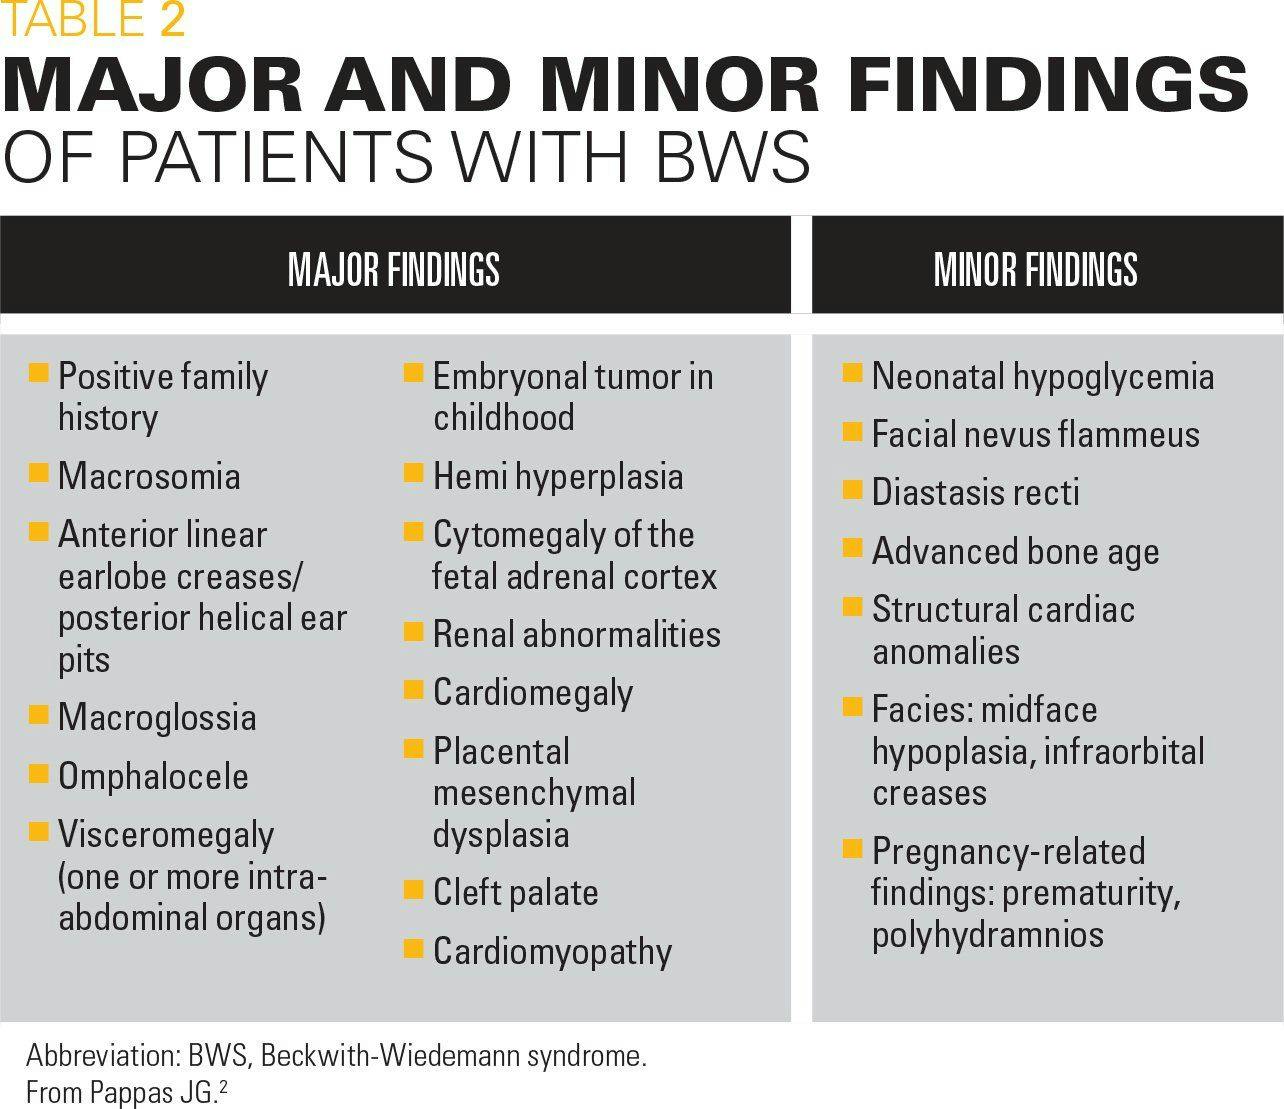 Major and minor findings of patients with BWS